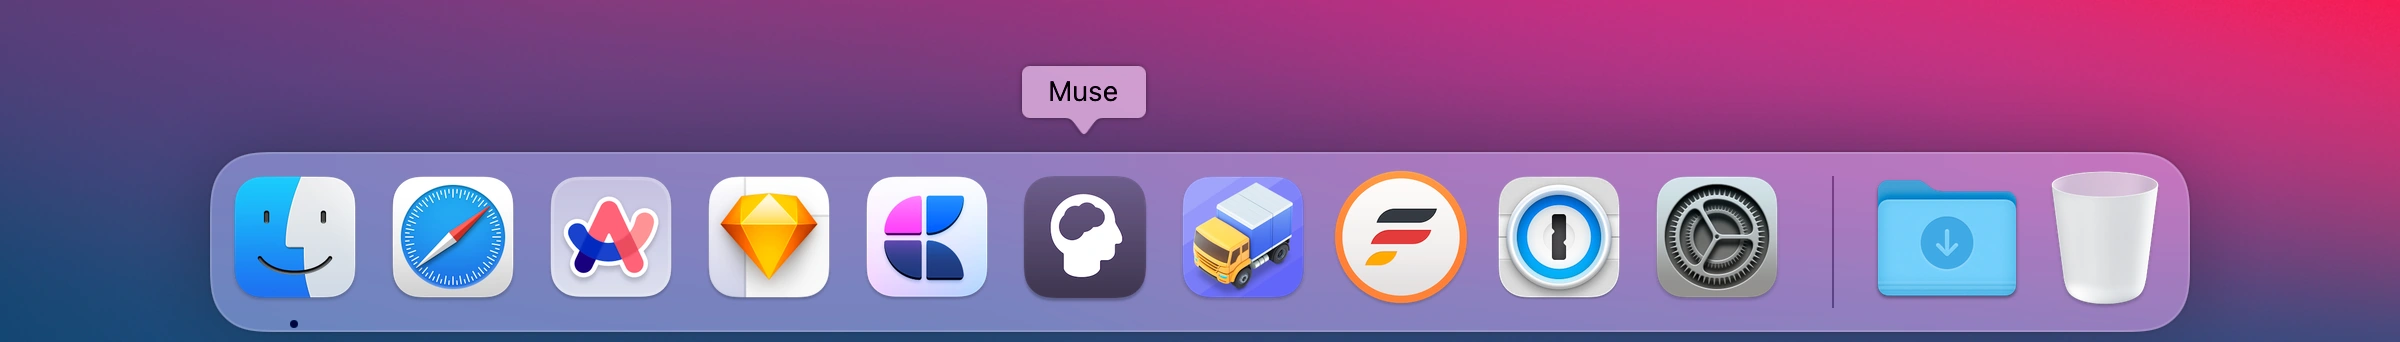 Muse in the Mac Dock